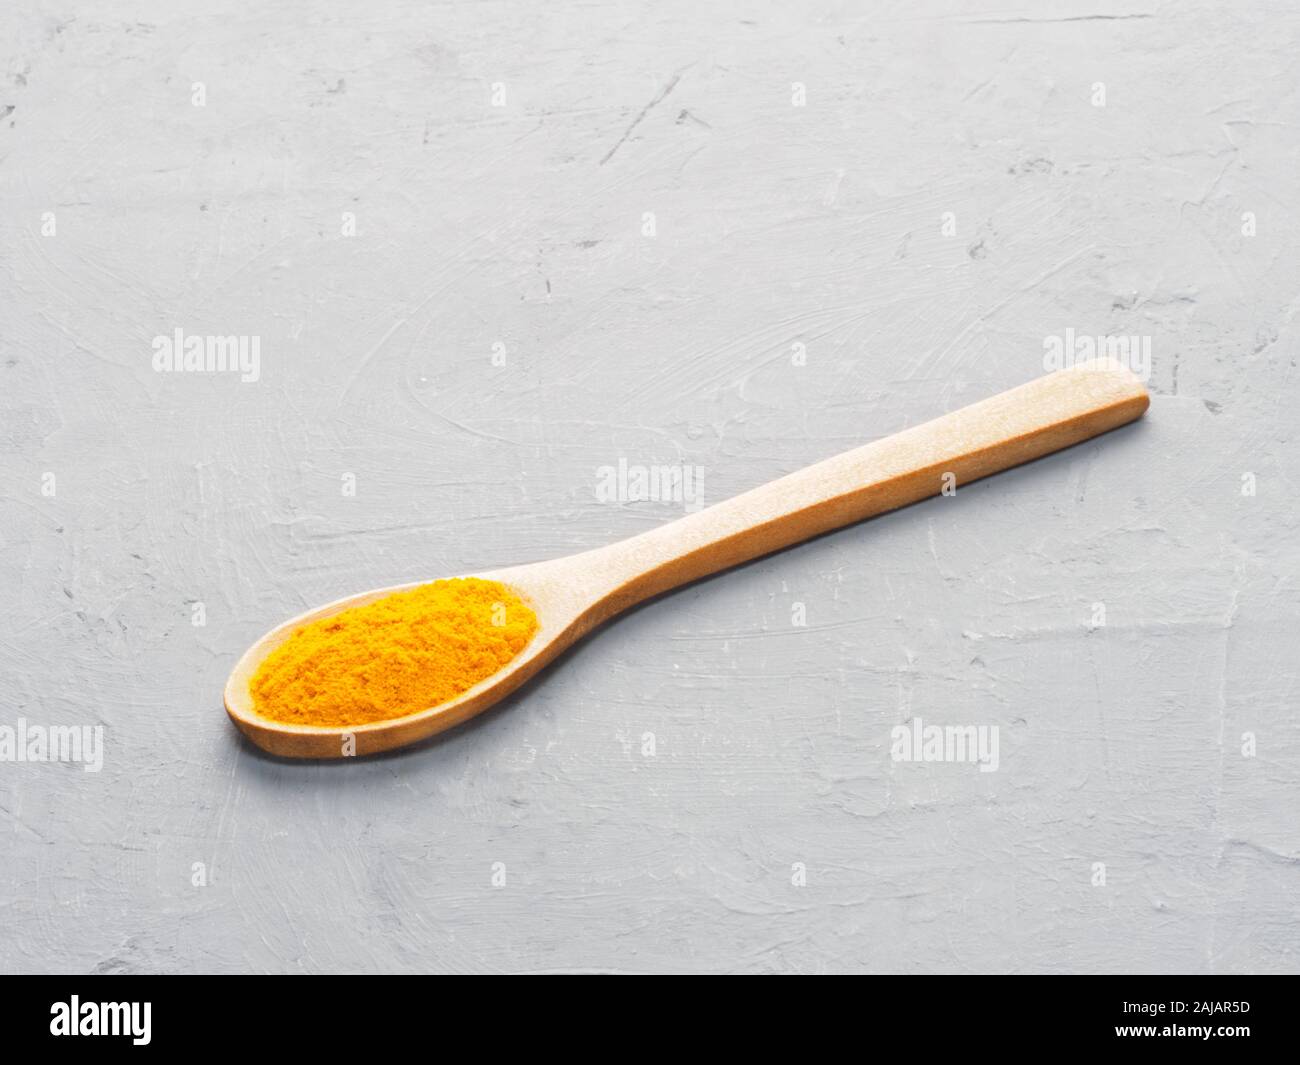 Spice turmeric in wooden spoon on gray concrete background. Indian cuisine, ayurveda, naturopathy concept Stock Photo